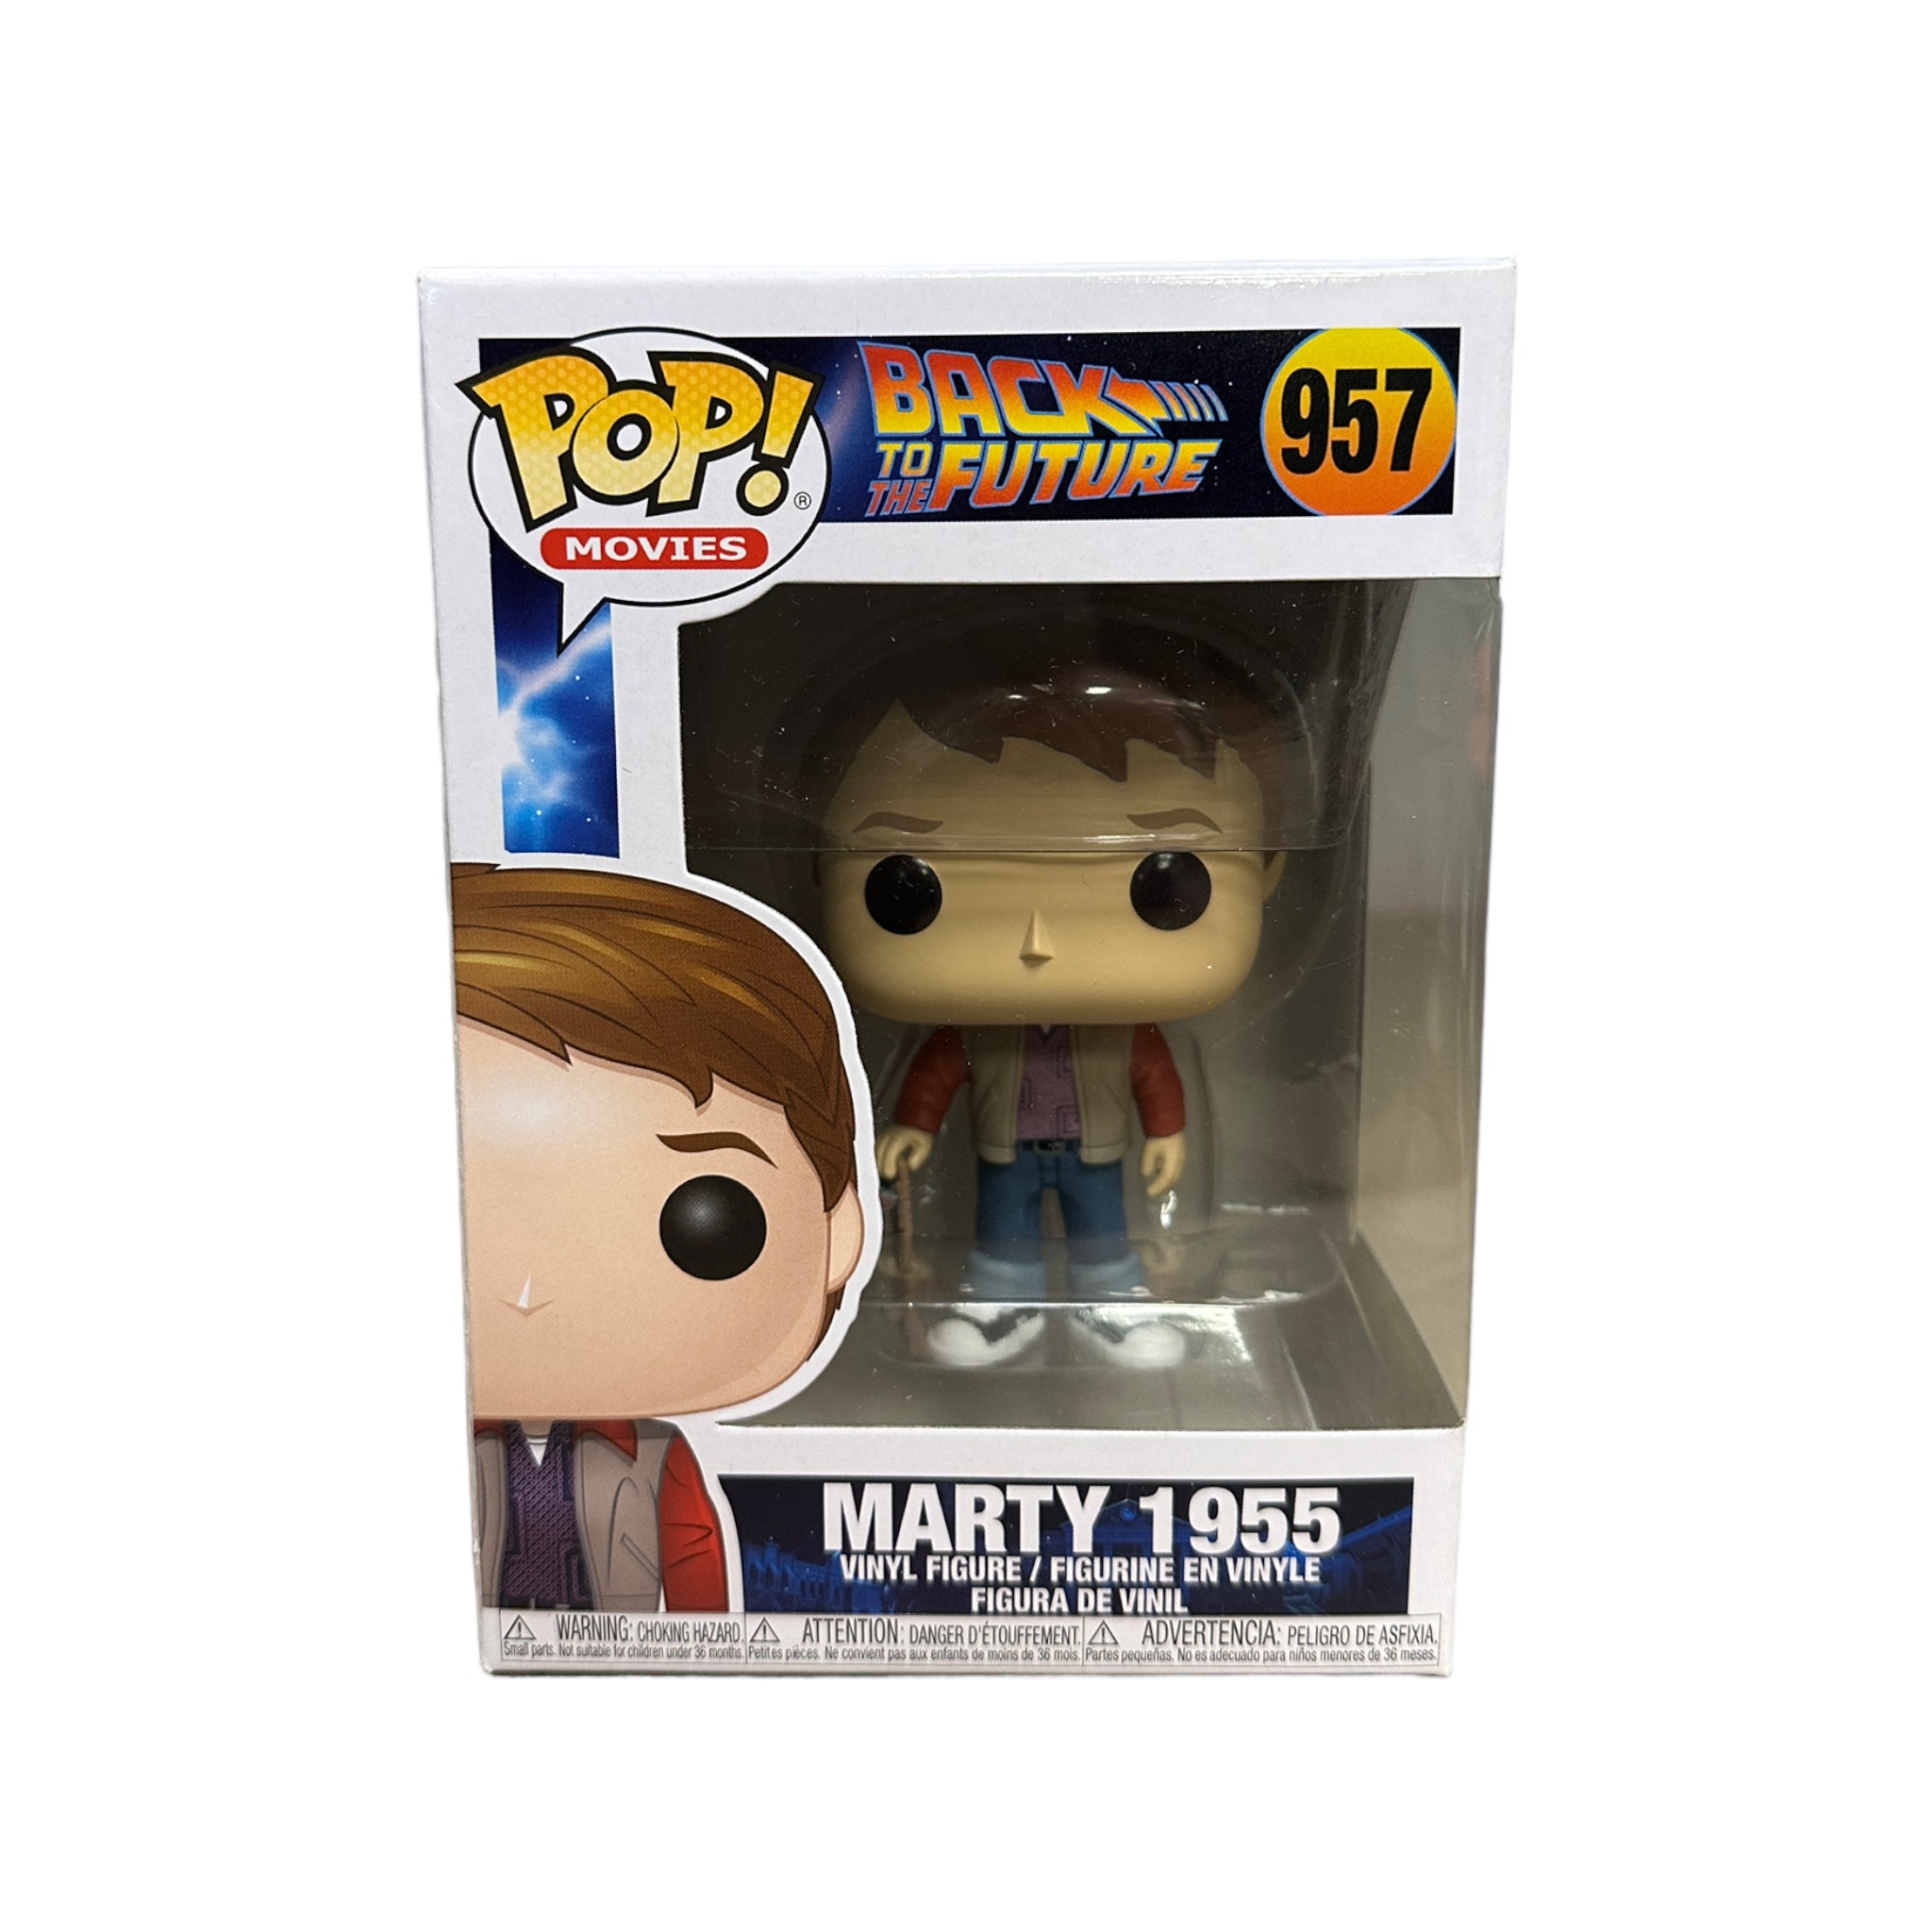 Marty 1955 #957 Funko Pop! - Back to The Future - 2020 Pop! - Condition 9/10